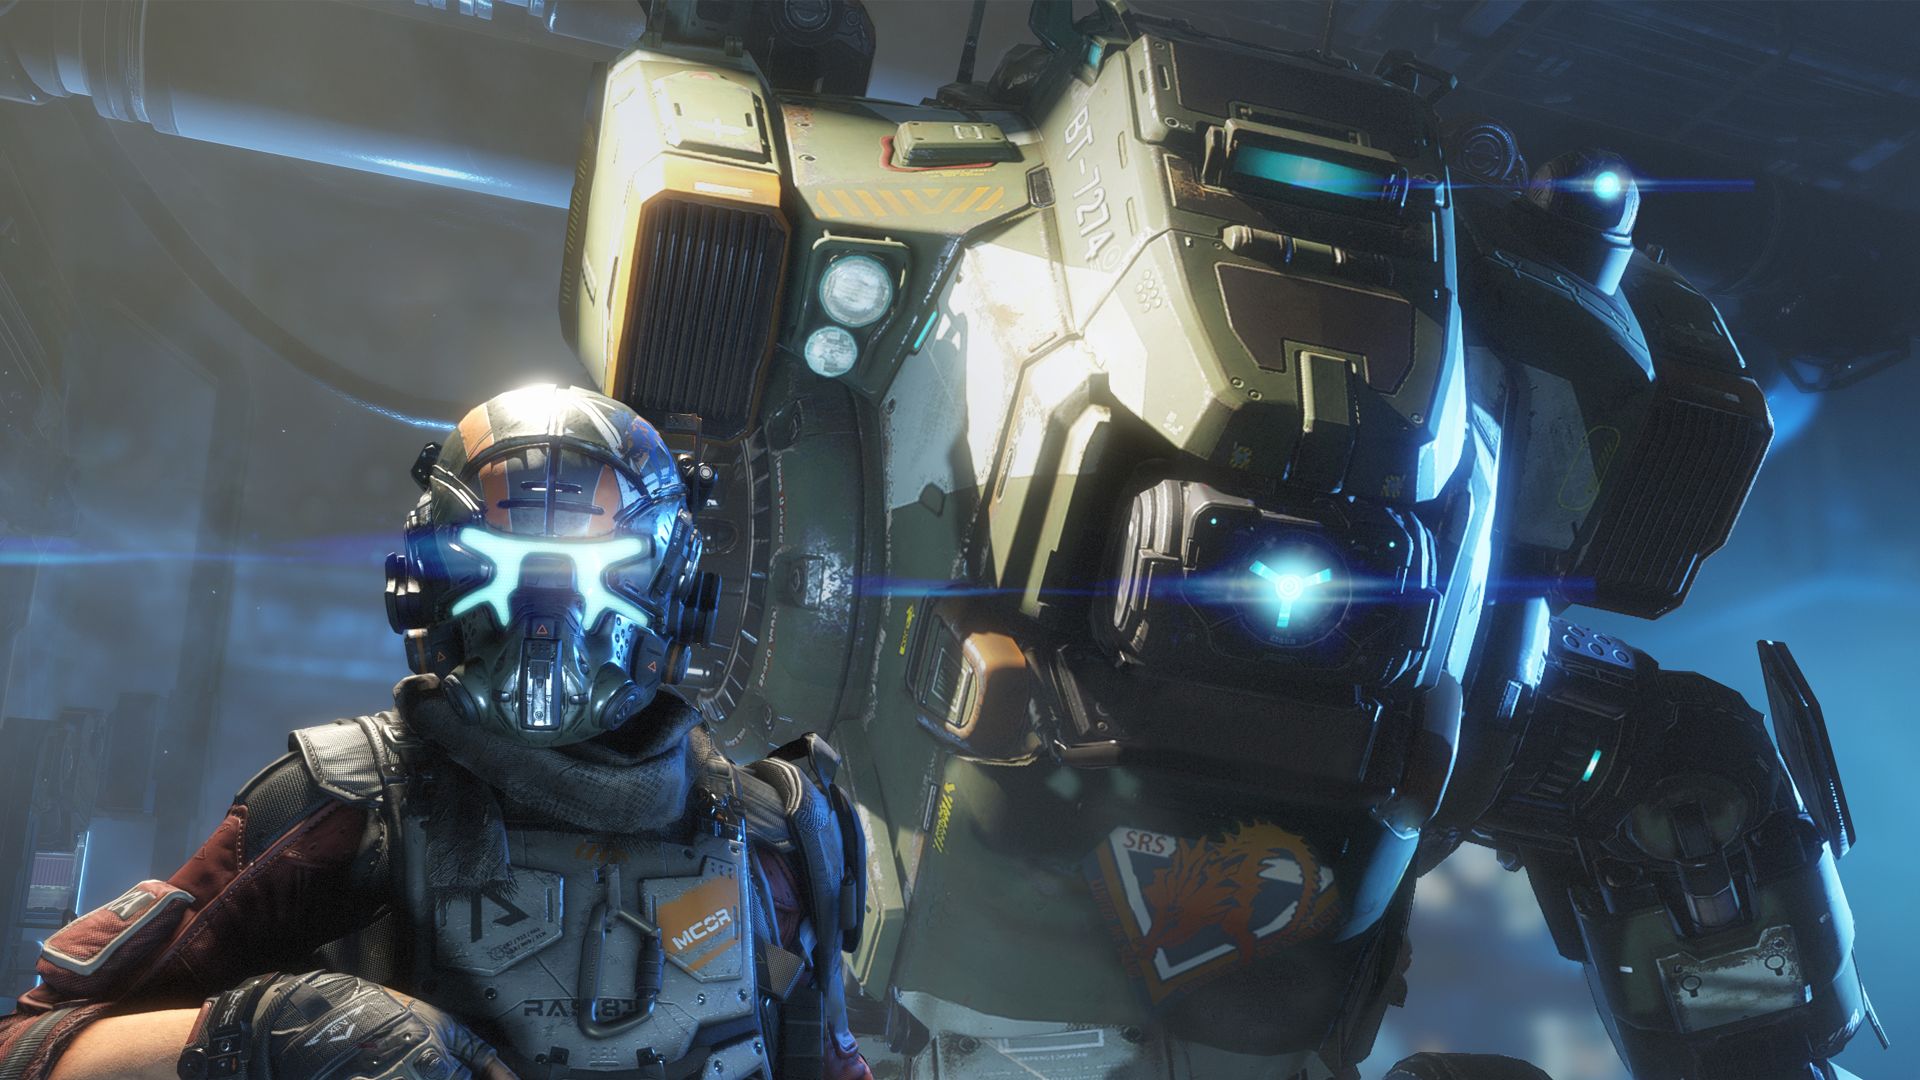 Development for New Titanfall Game Delayed as Team Focuses on Apex Legends